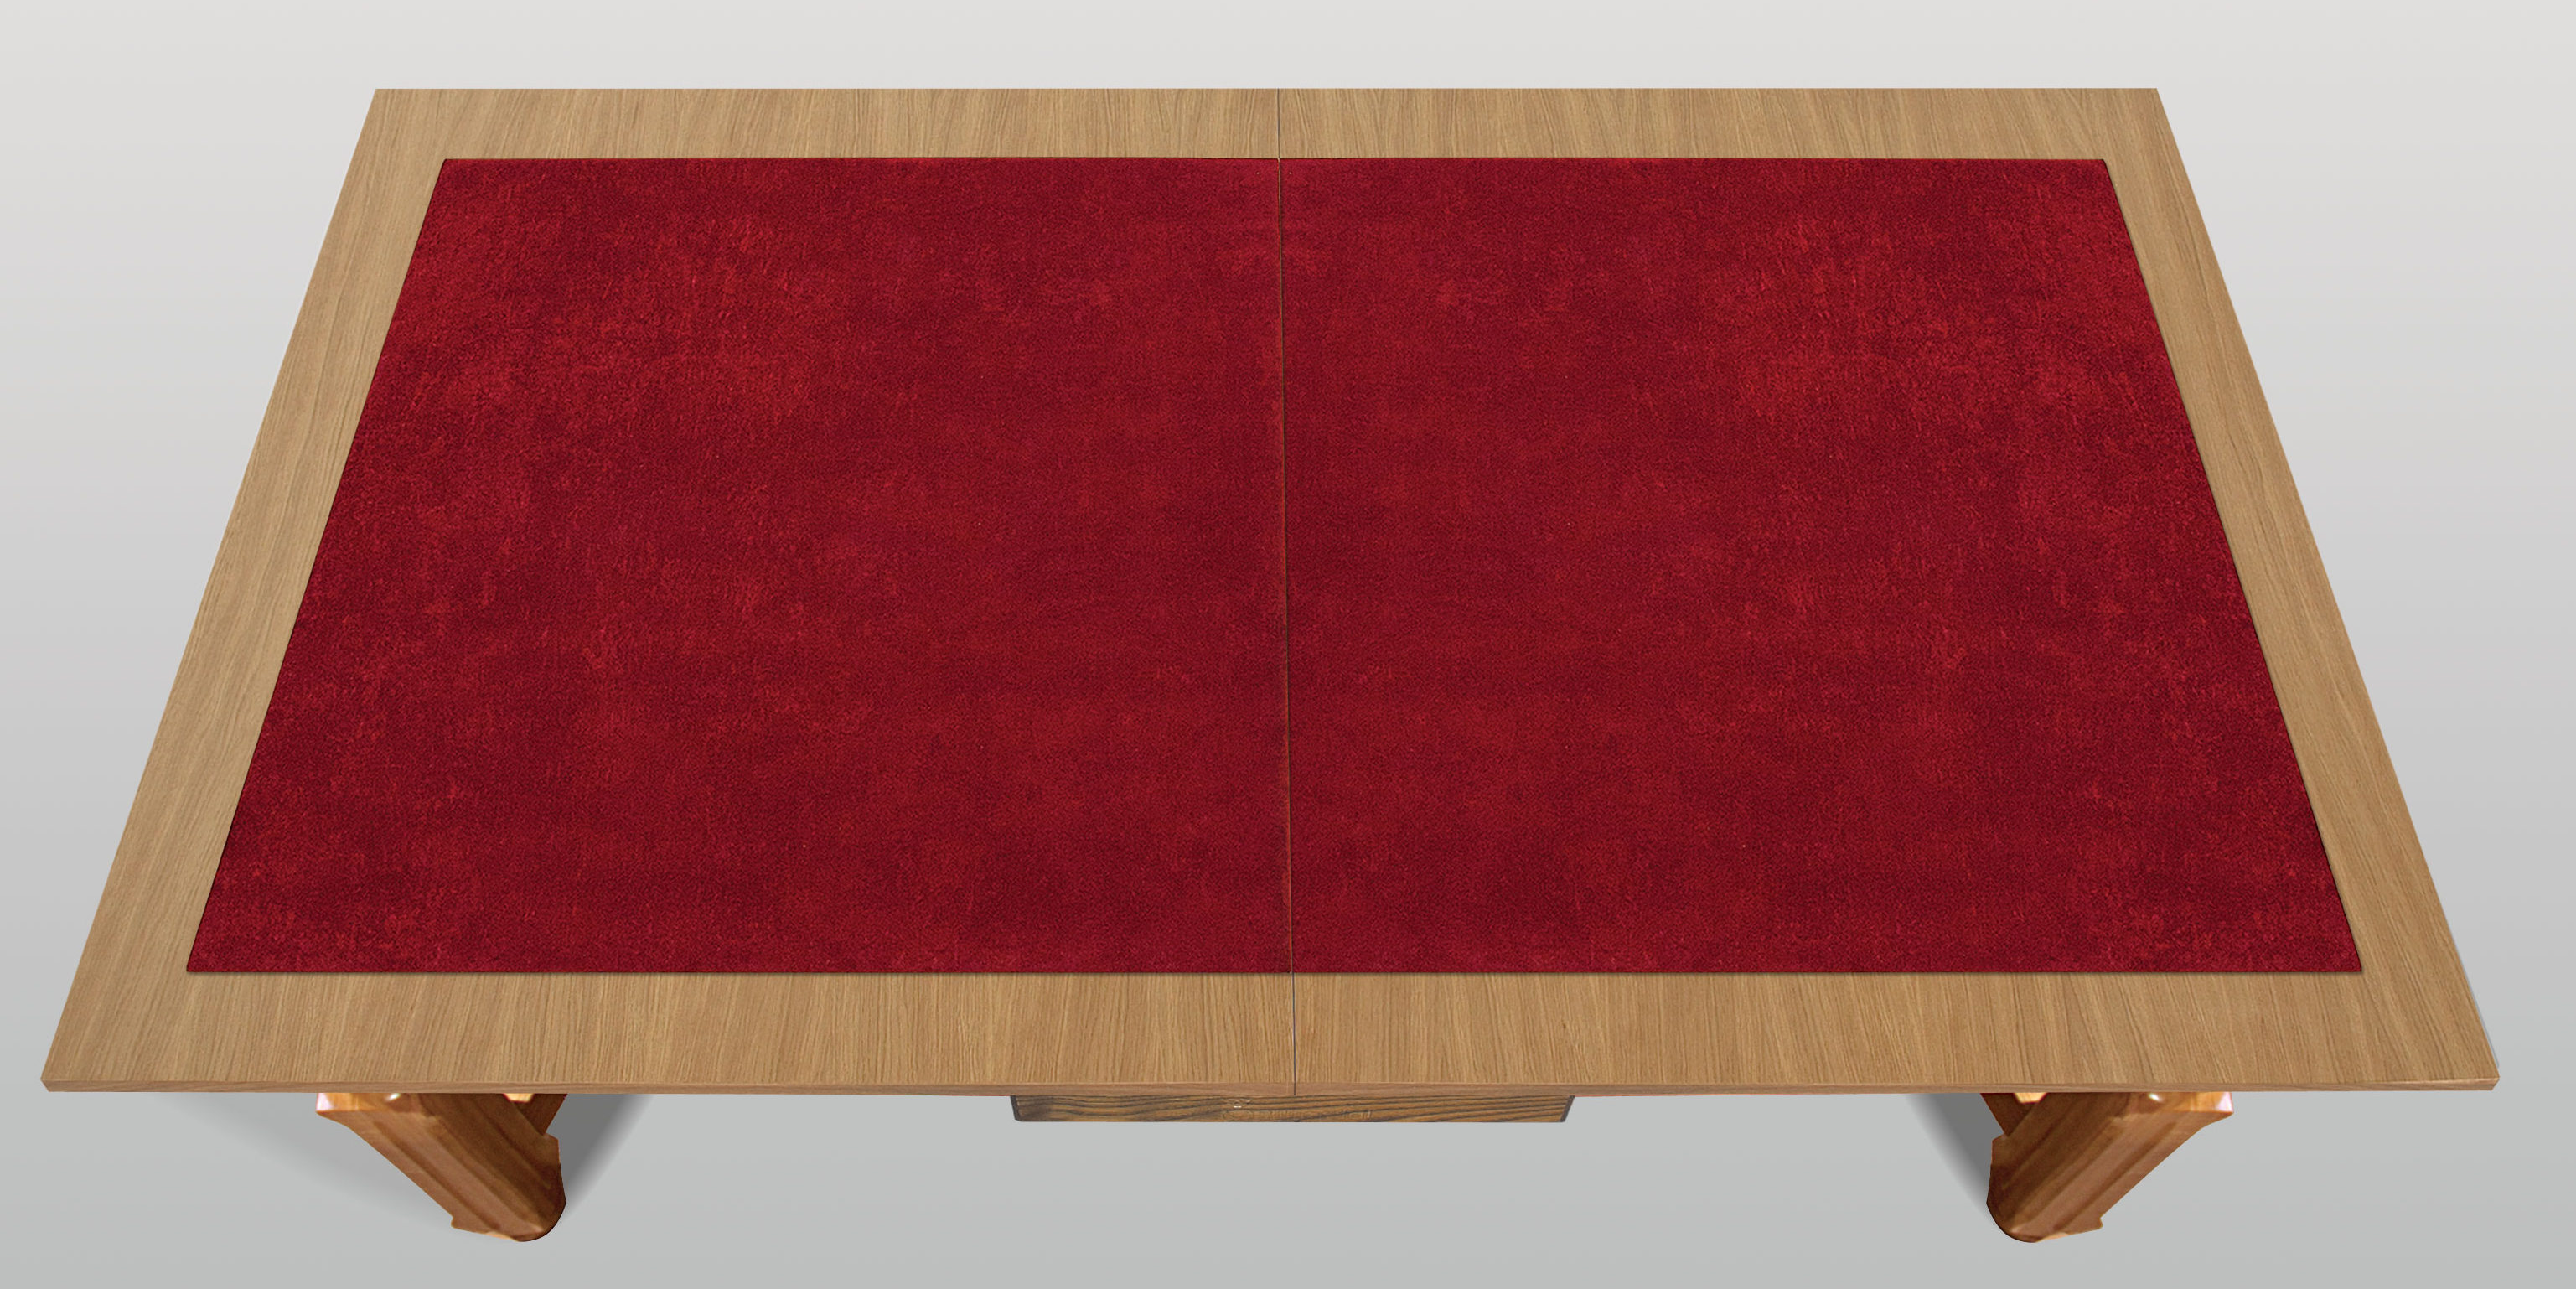 Red Poker Table Top